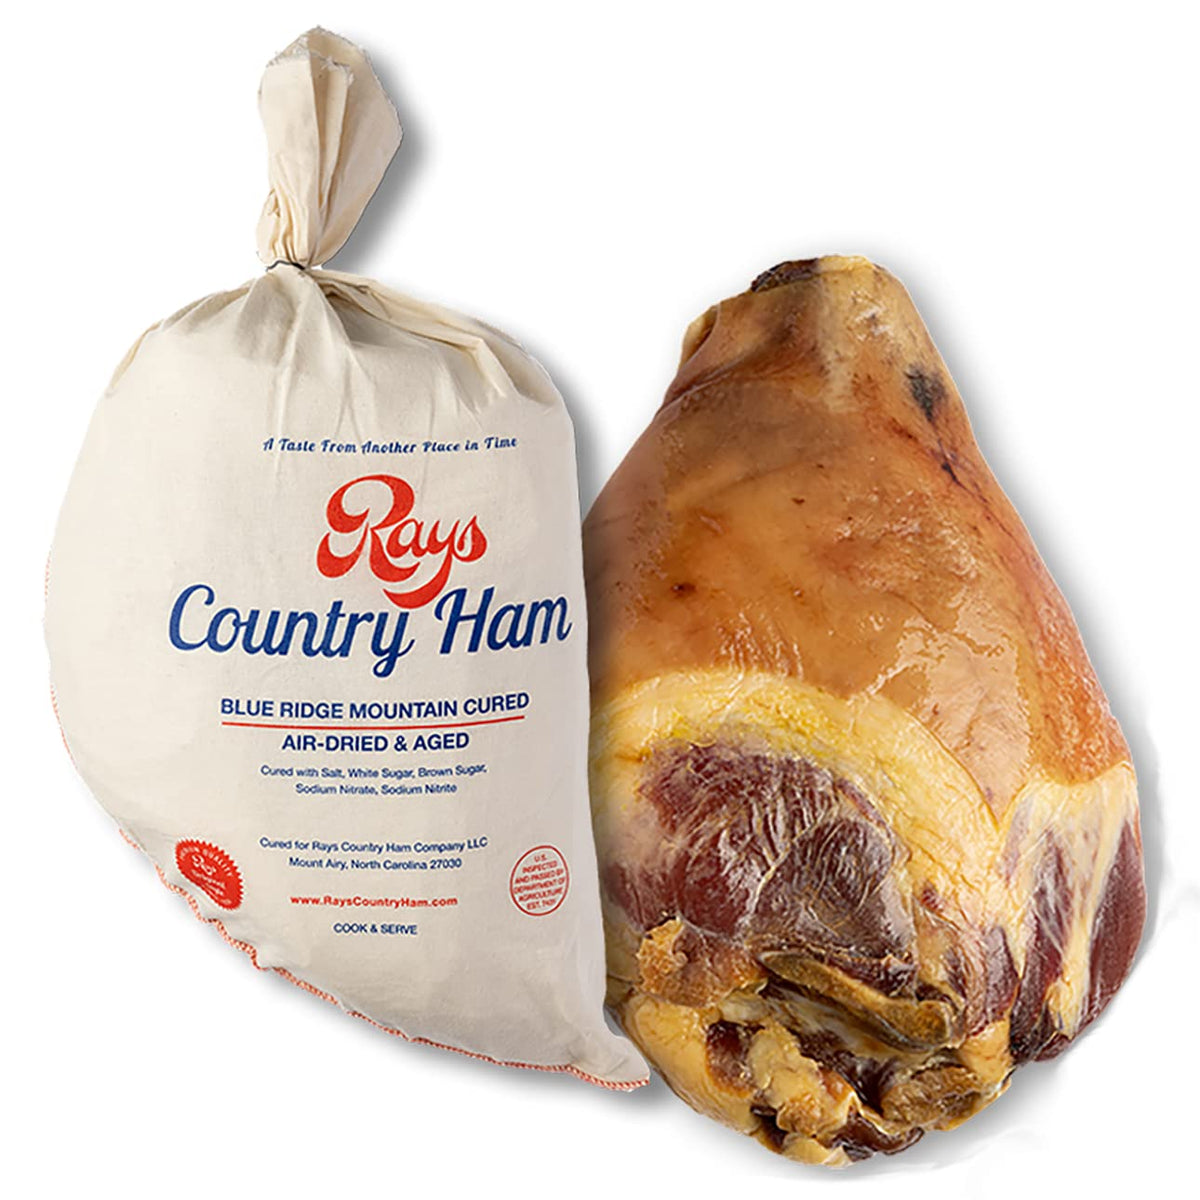 Rays Country Ham - 16 lb. - Whole Bone-in Country Ham - Blue Ridge Mountain Cured